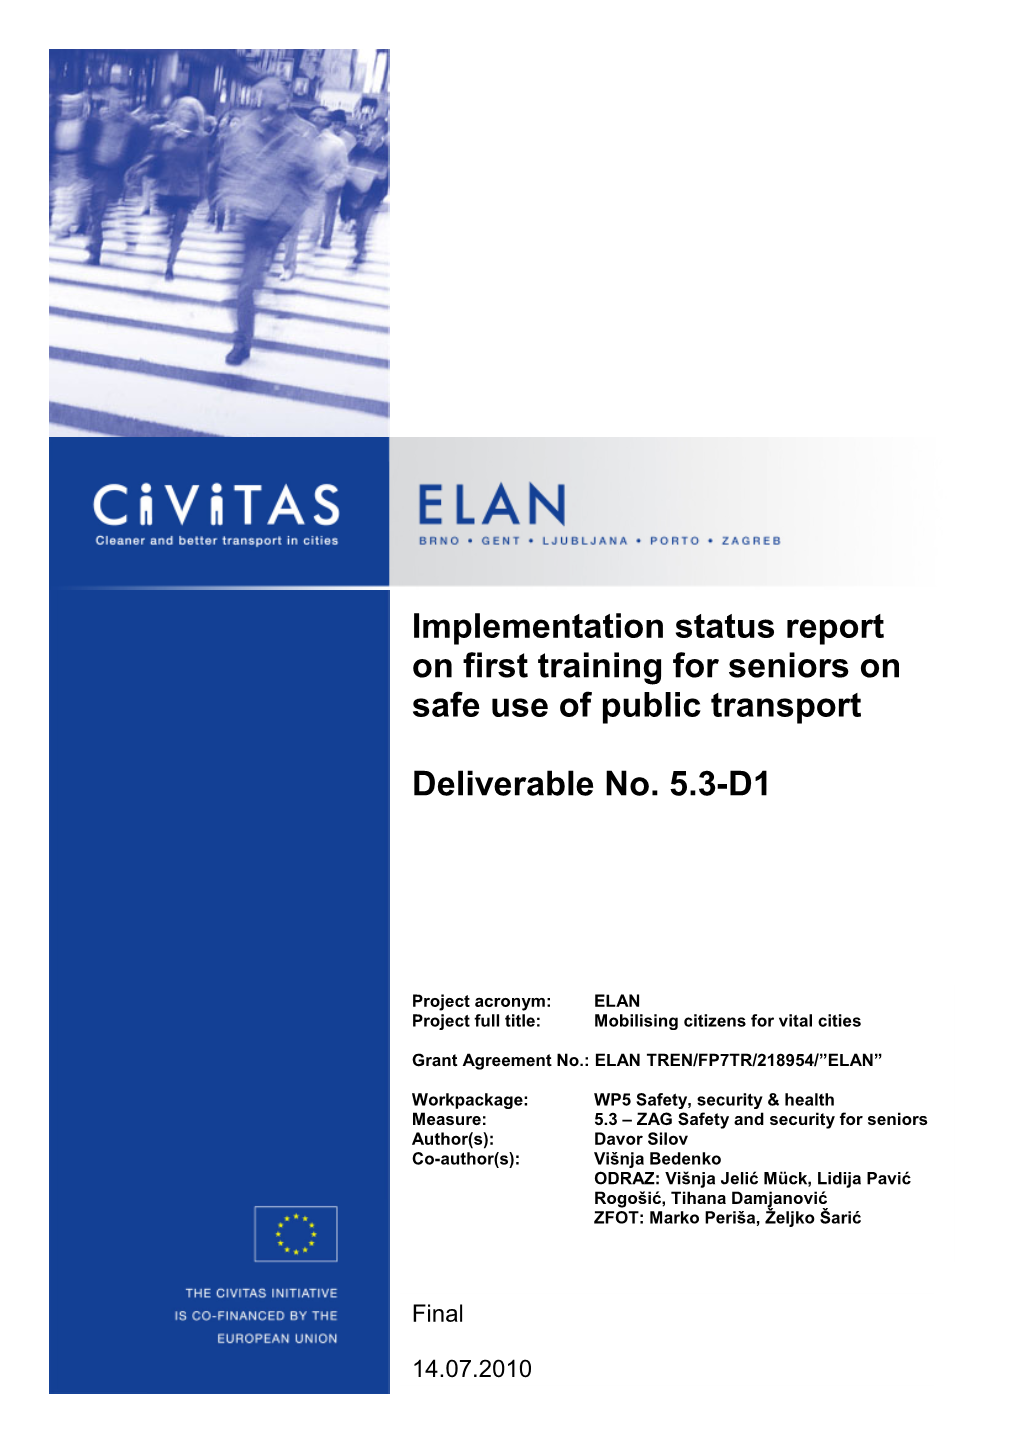 Implementation Status Report on First Training for Seniors on Safe Use of Public Transport